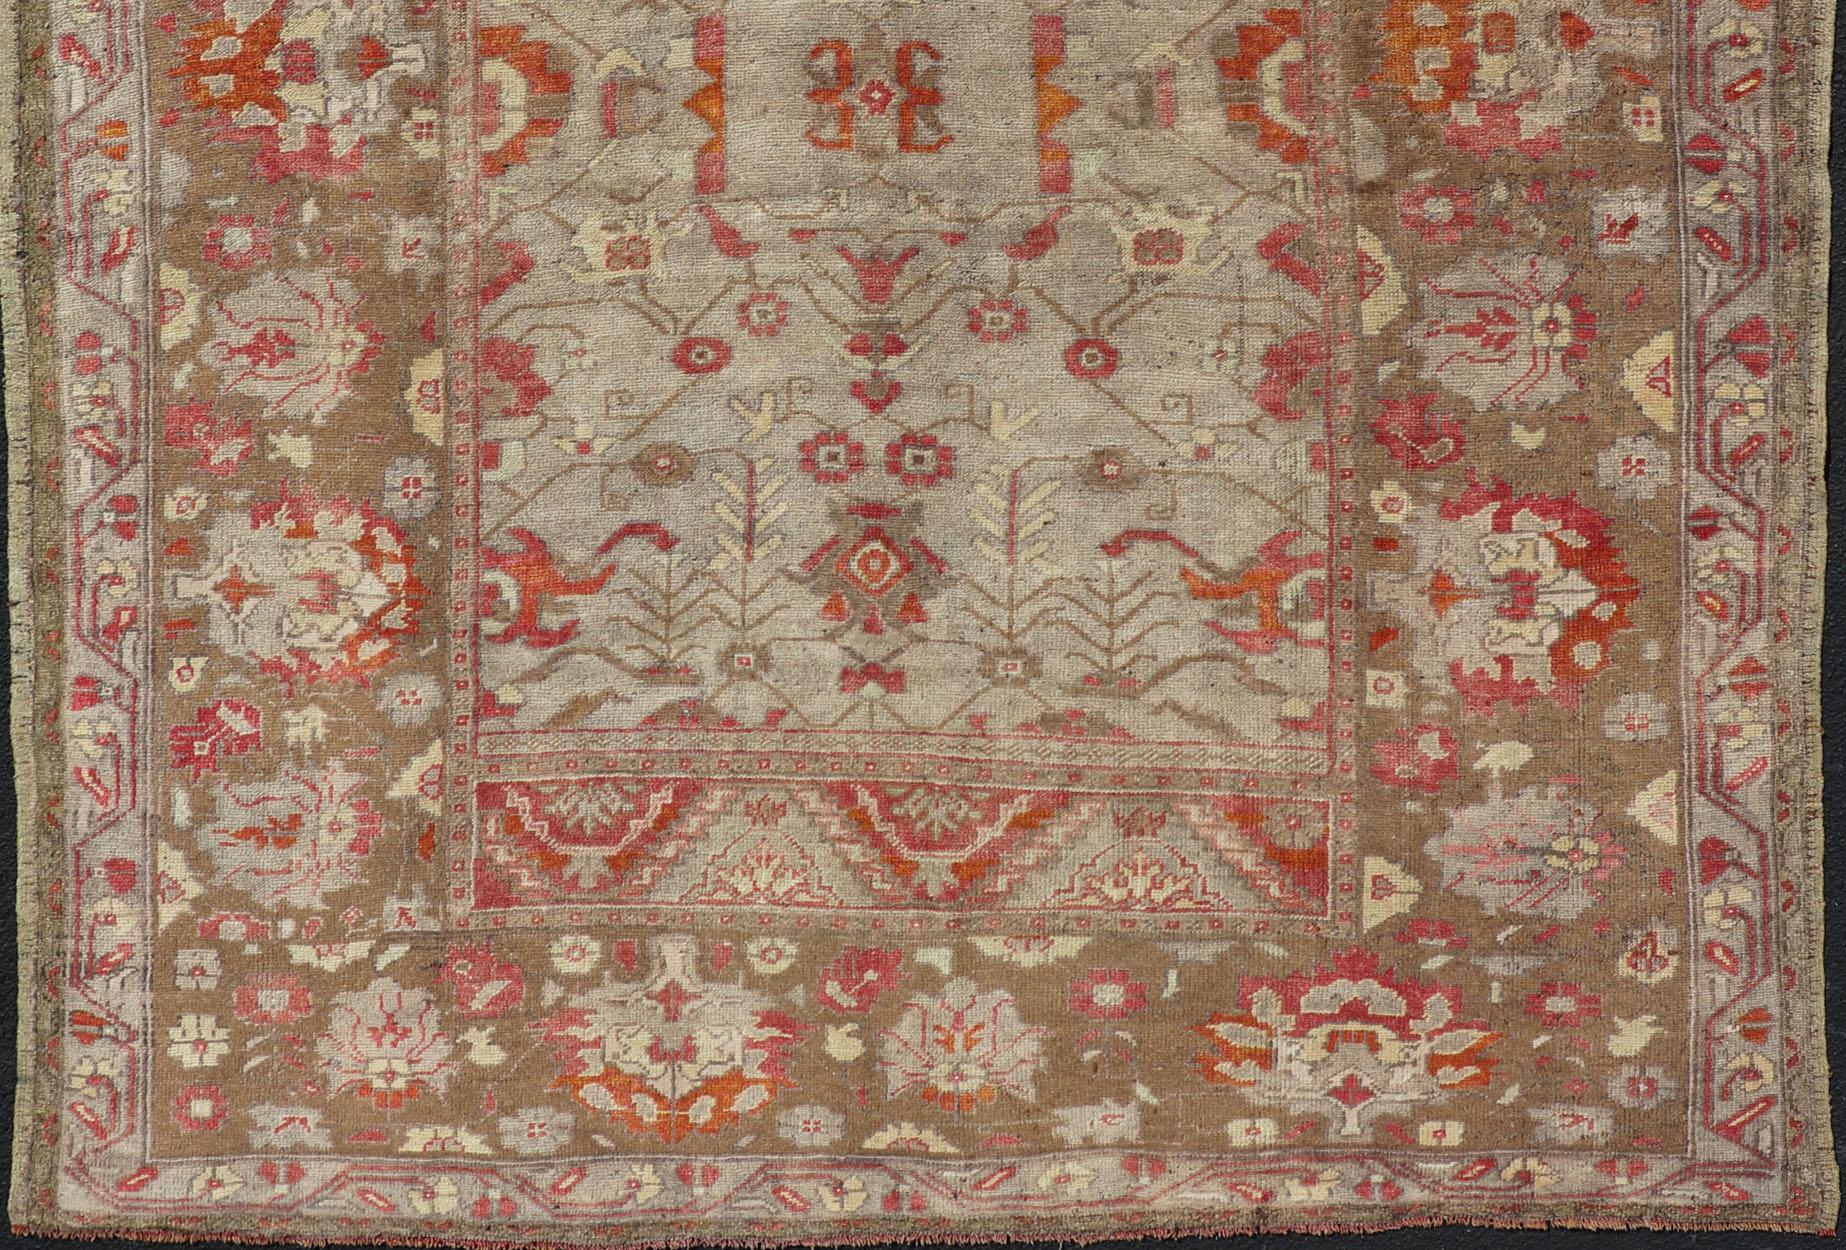 Square Size Antique Turkish Floral Oushak Rug in Green, Red Taupe & Tan In Good Condition For Sale In Atlanta, GA